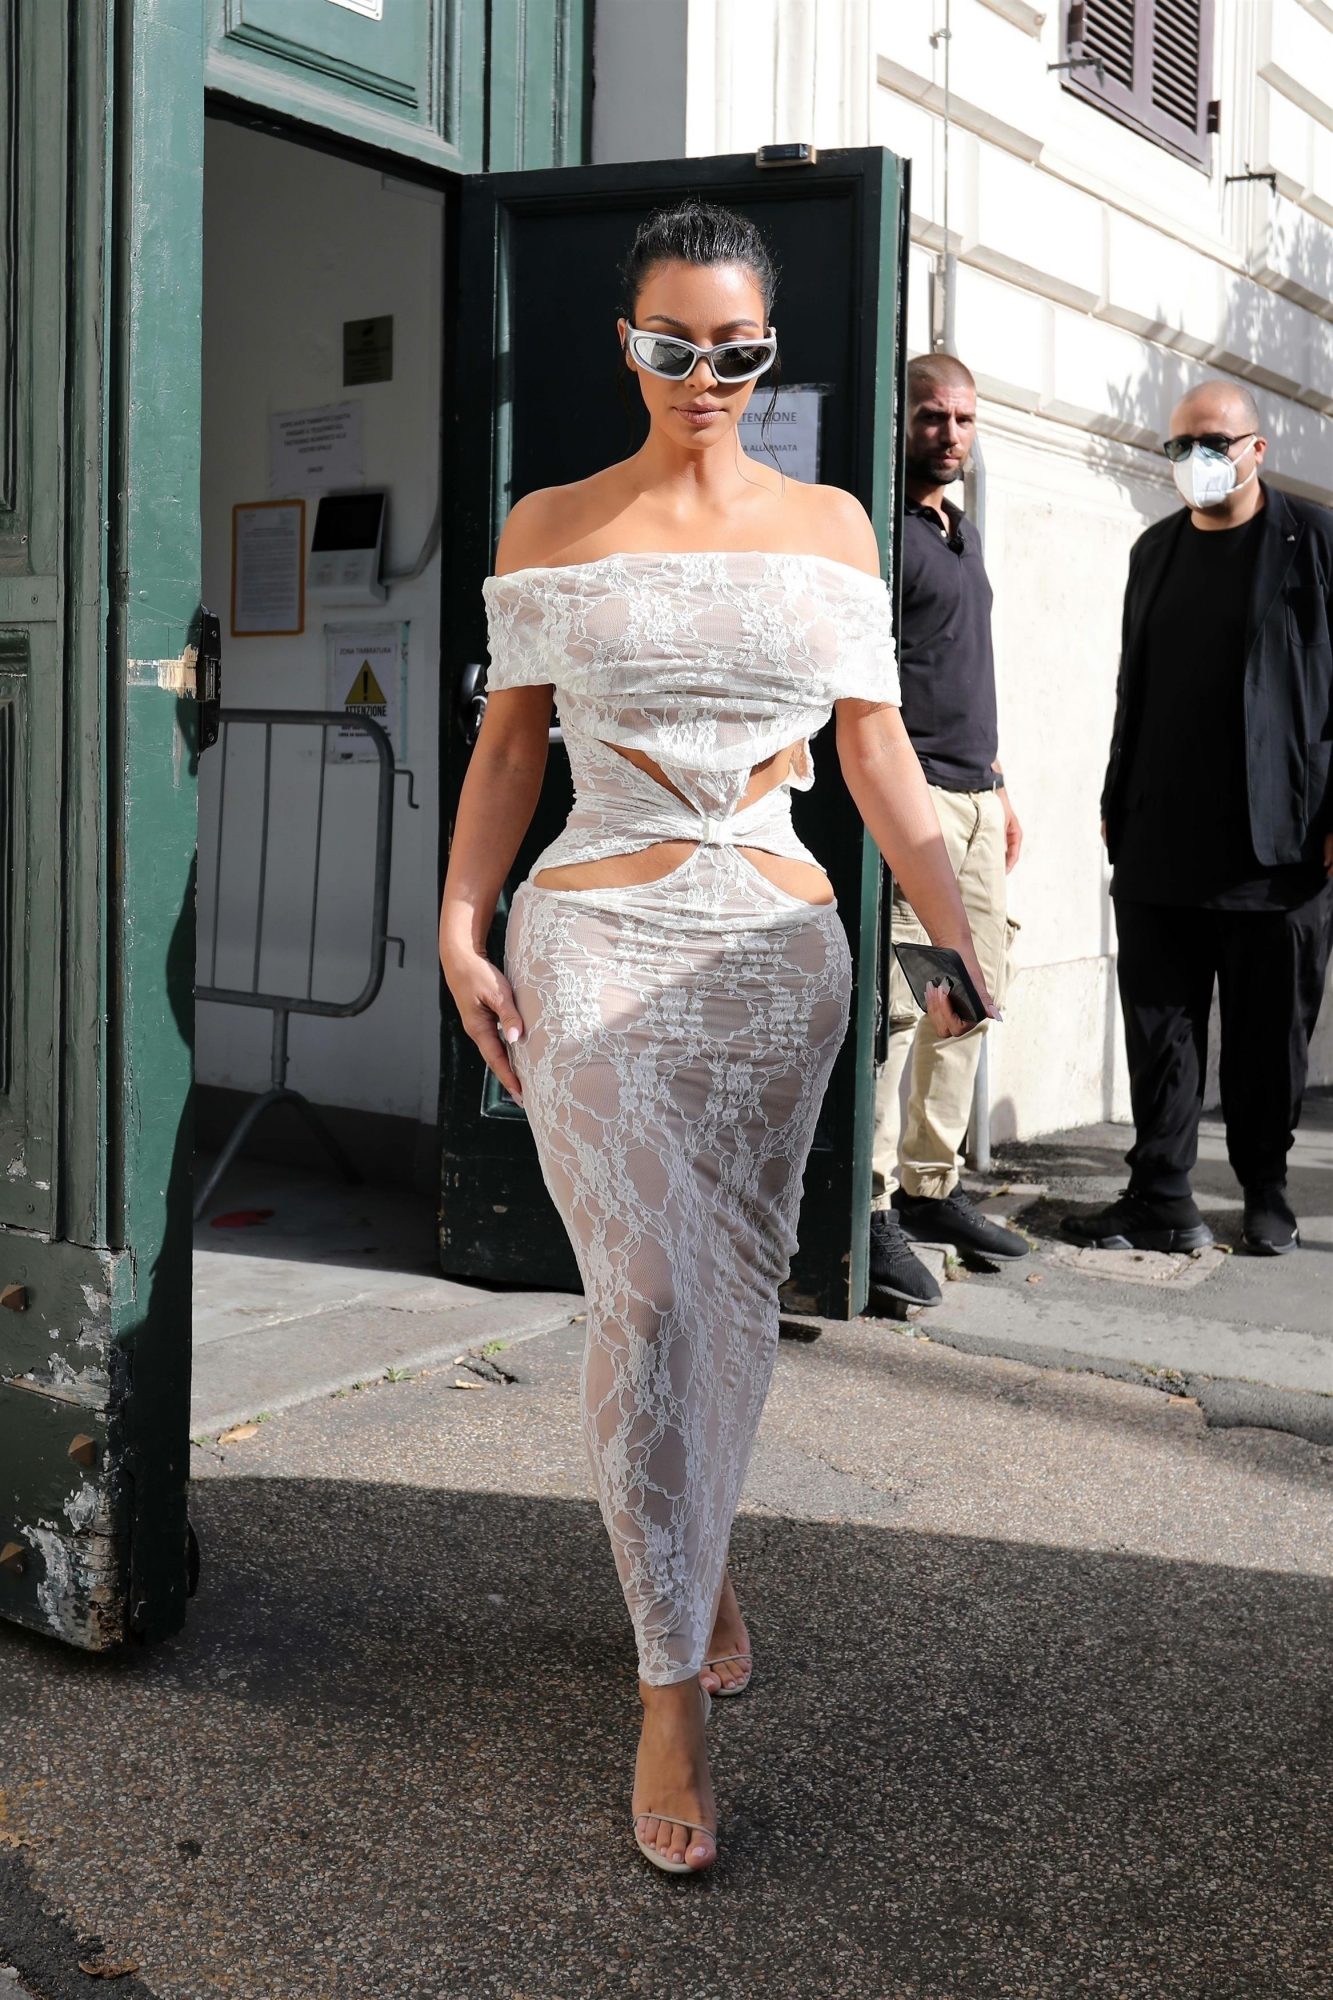 Kim Kardashian visited the Vatican in a sexy white dress